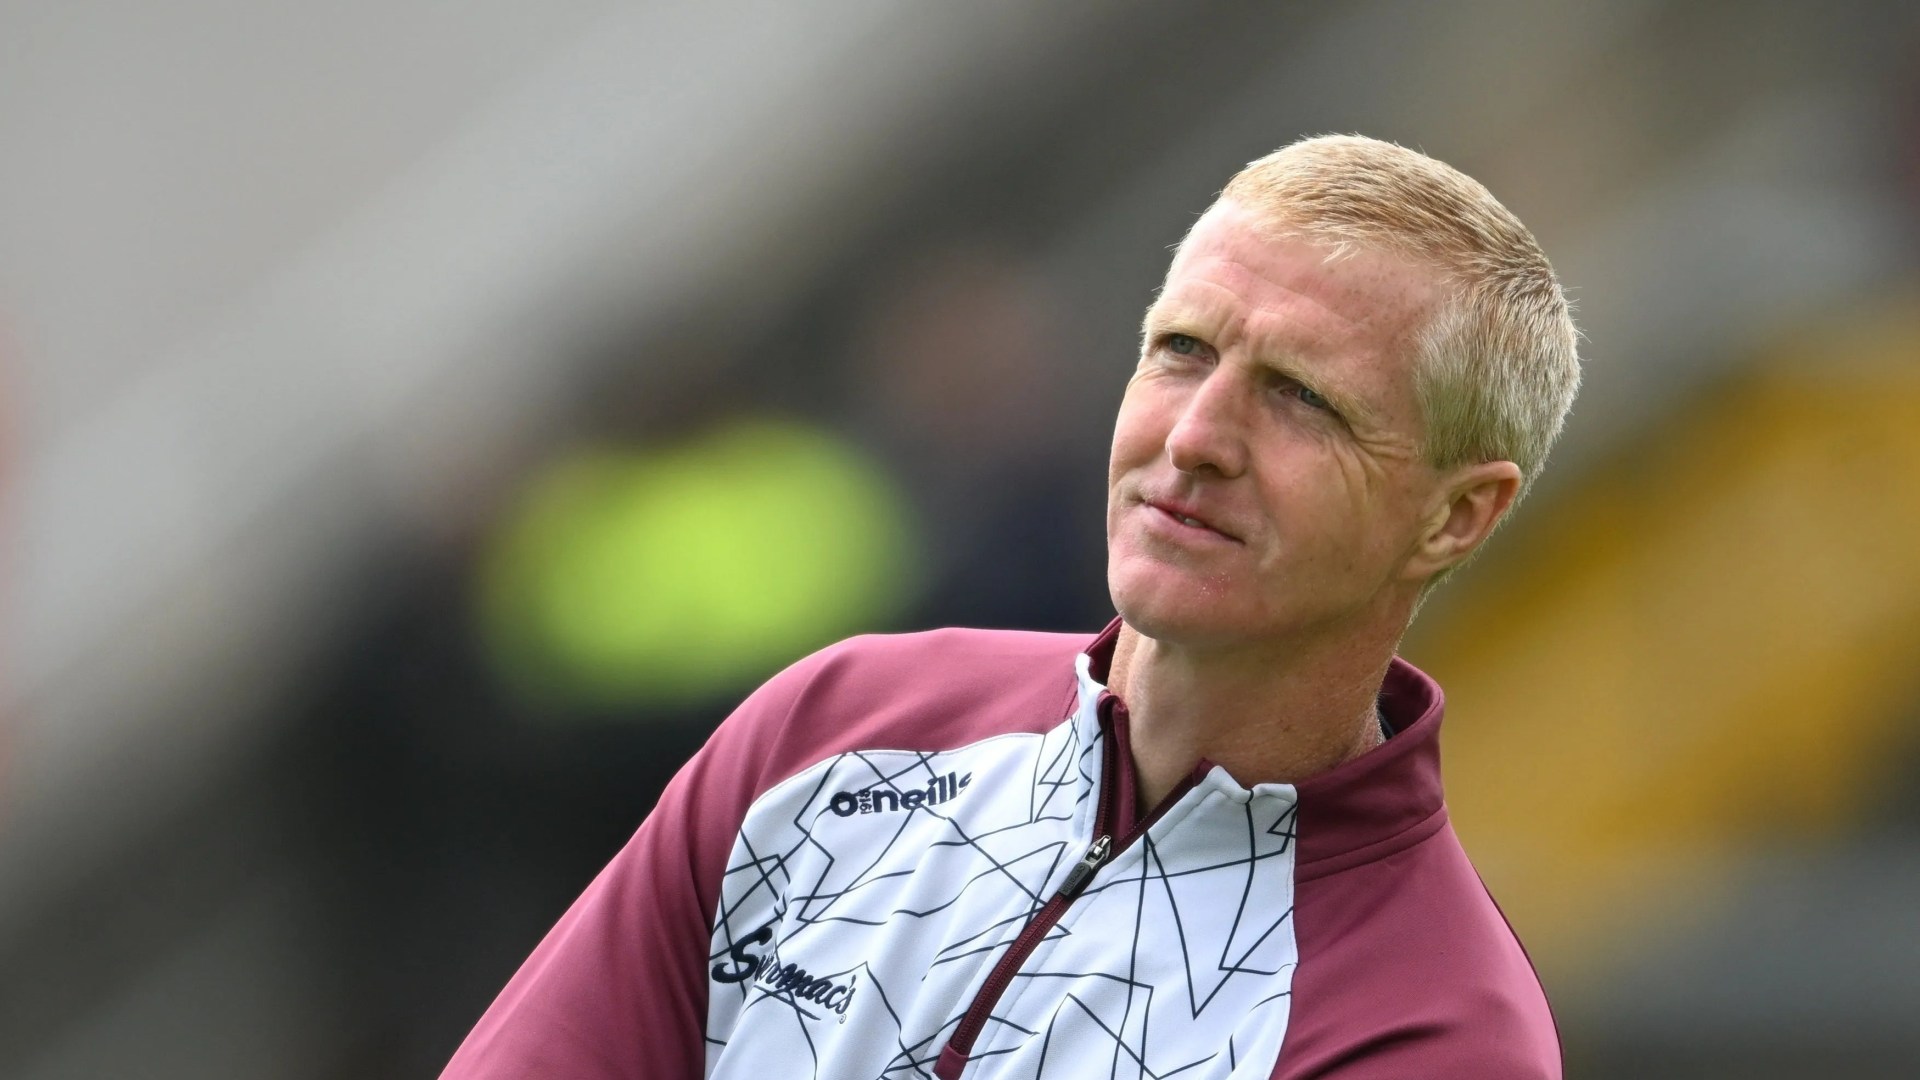 Hasn’t a clue – Coach snubbed by Galway for Henry Shefflin slams interview involvement of Irish rugby legend [Video]